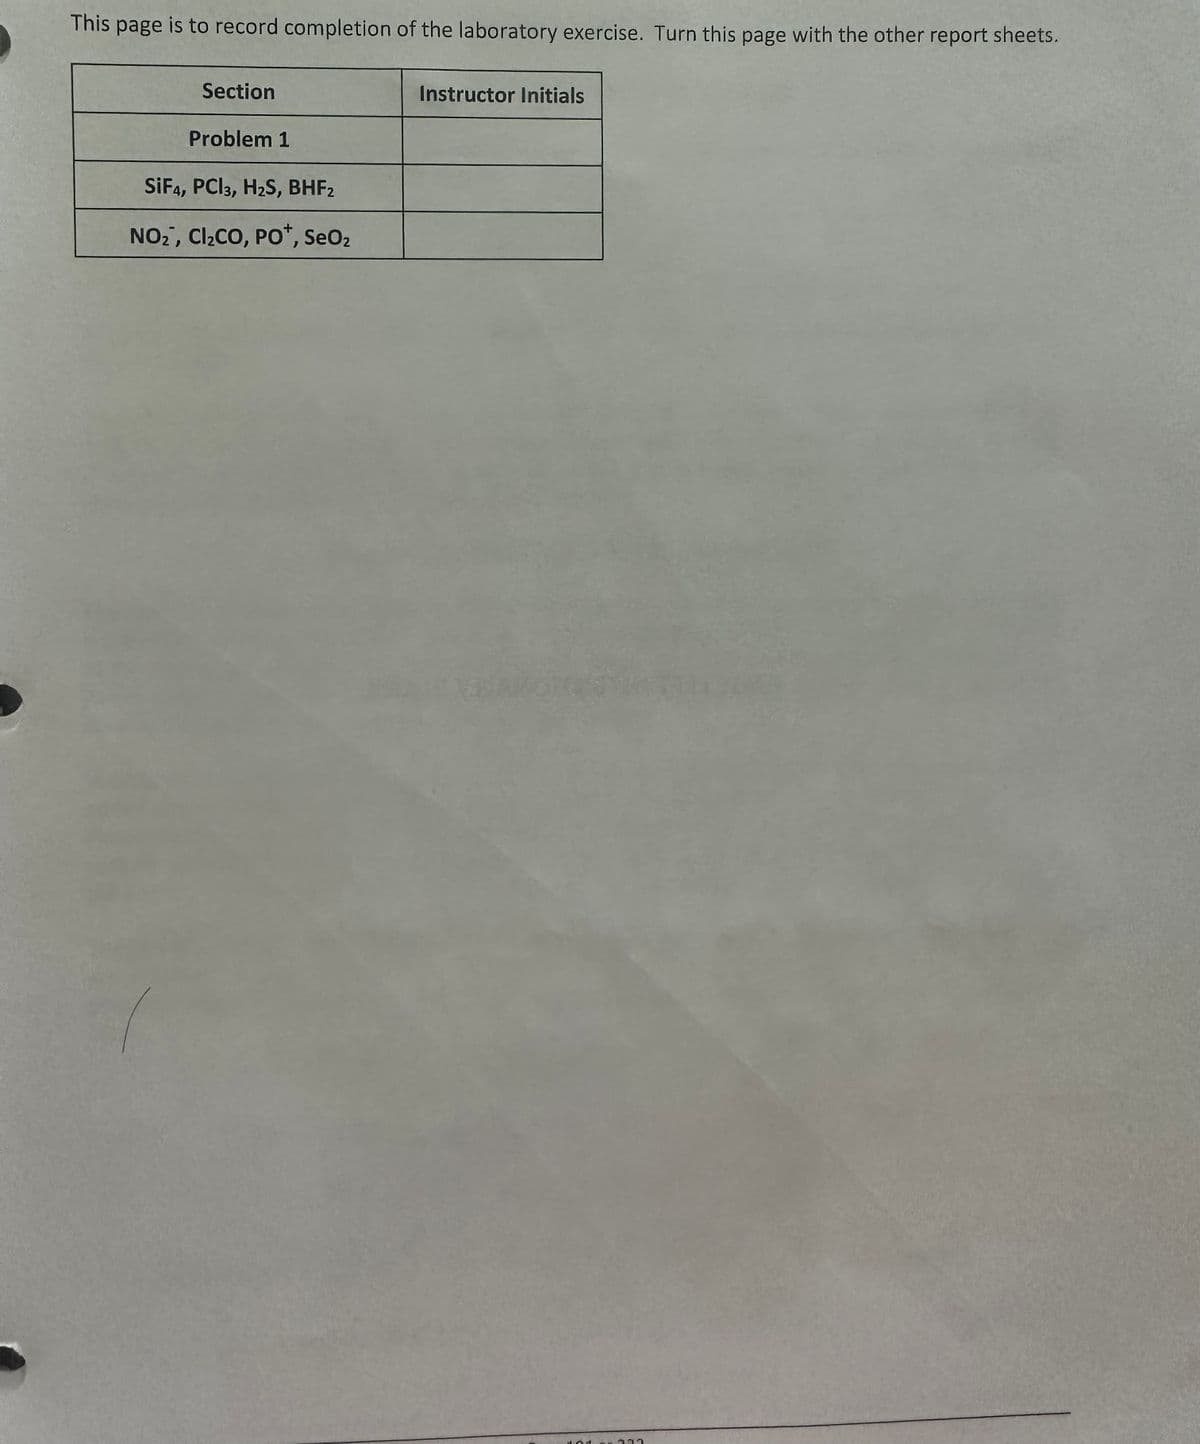 This
page
is to record completion of the laboratory exercise. Turn this page with the other report sheets.
Section
Problem 1
SiF4, PCI3, H₂S, BHF2
NO₂, Cl₂CO, PO+, SeO₂
Instructor Initials
333